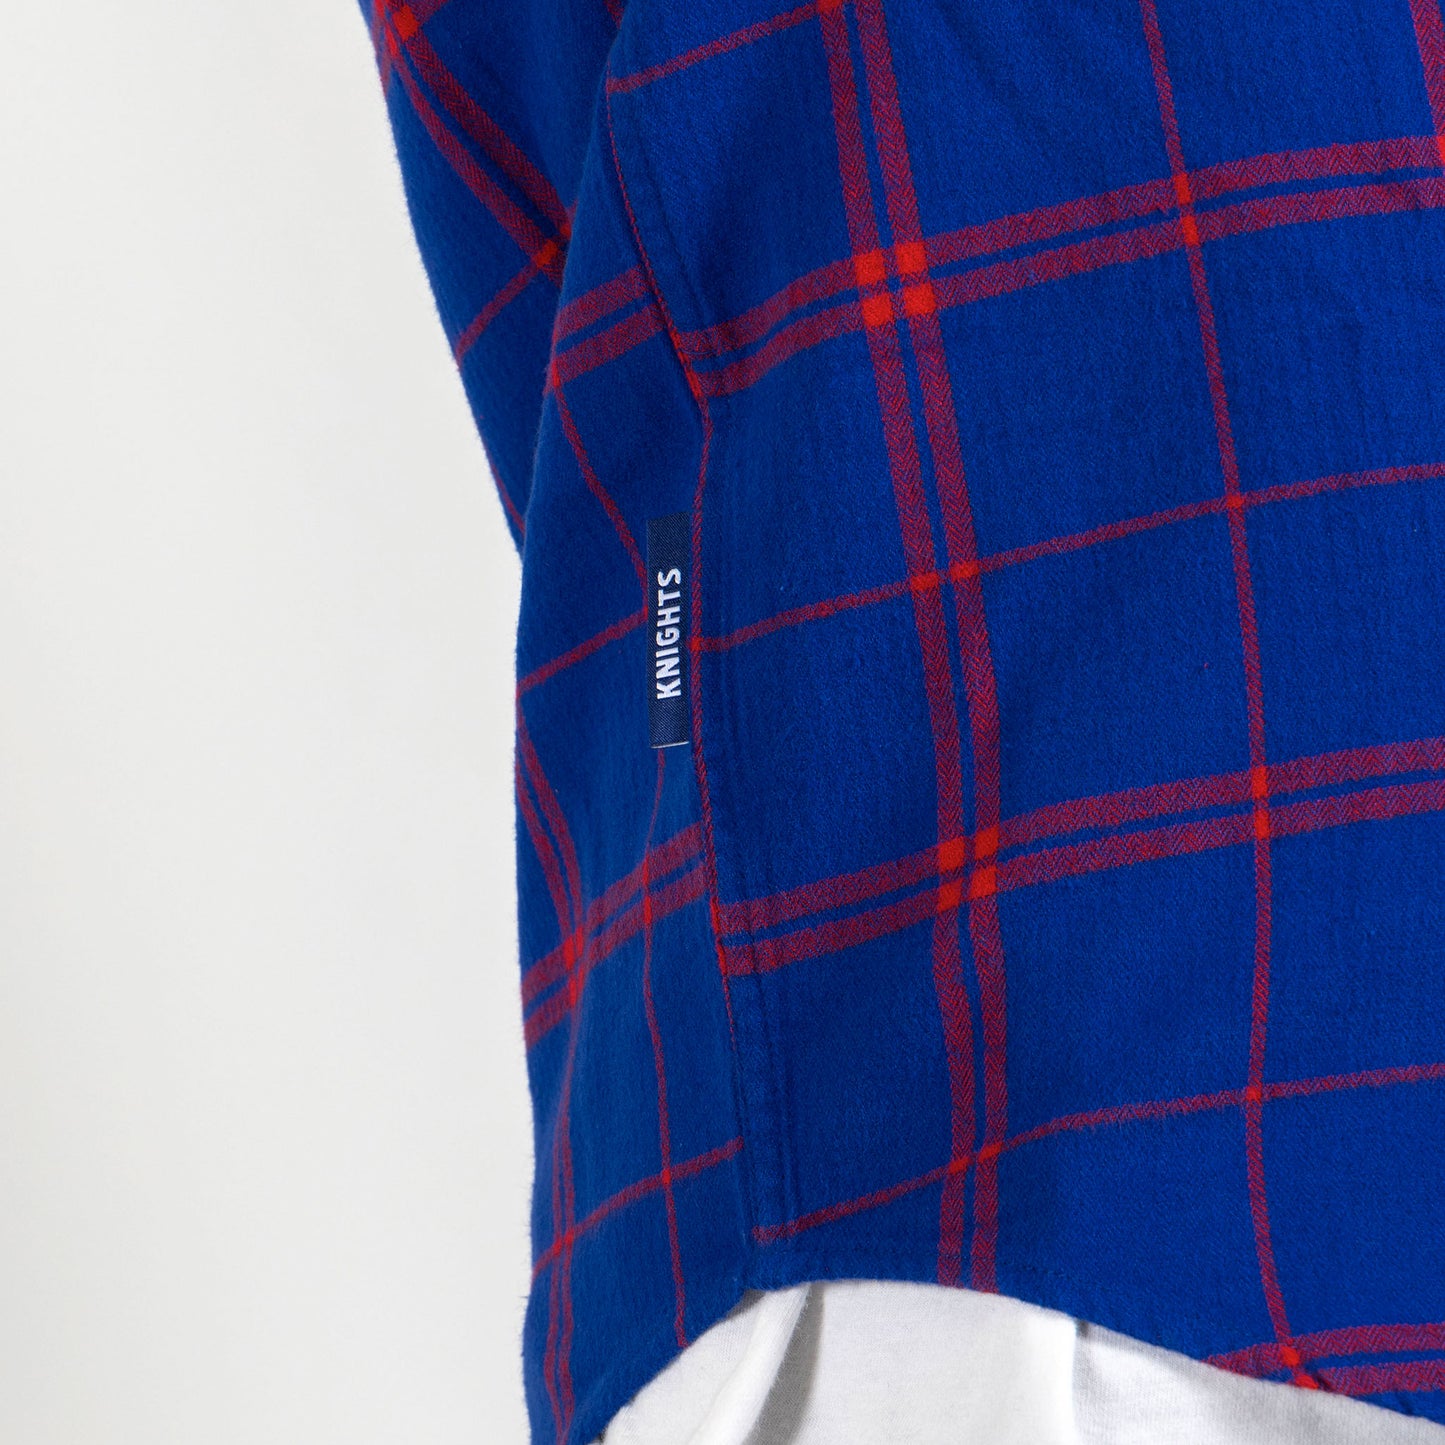 Newcastle Knights Mustang Flannel Shirts